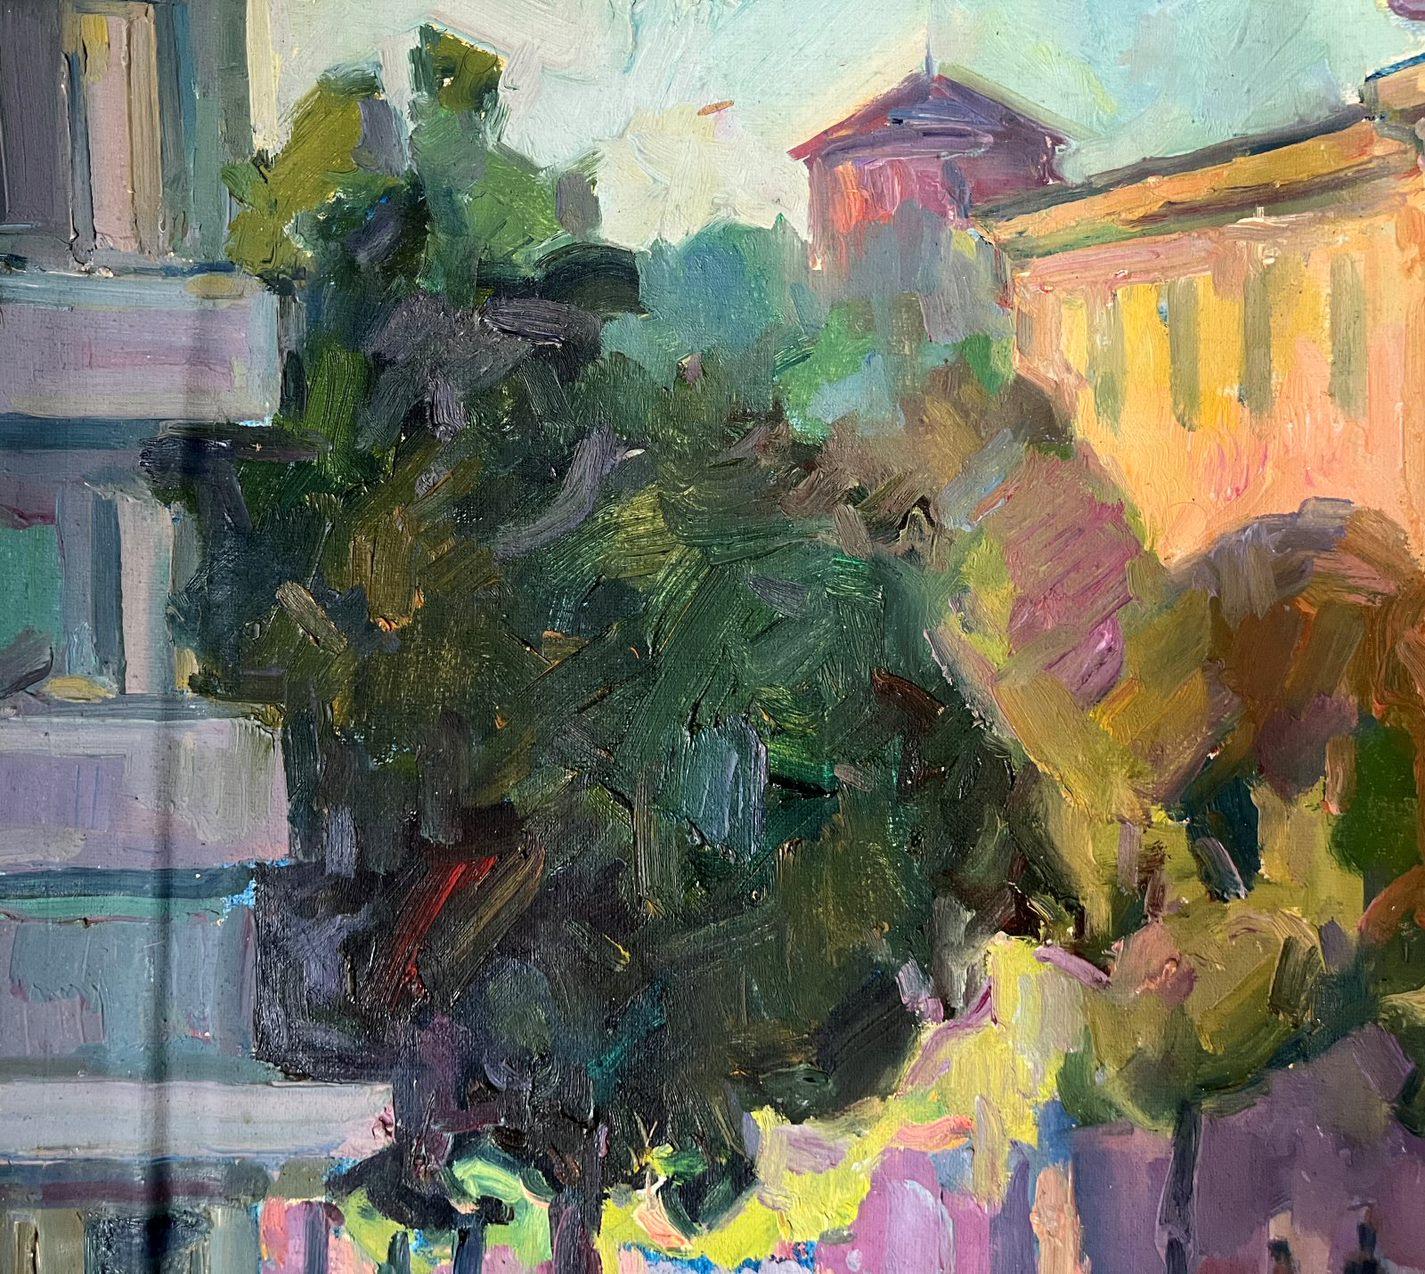 Artist: Peter Tovpev
Work: Original oil painting, handmade artwork, one of a kind 
Medium: Oil on Canvas 
Year: 2009
Style: Impressionism
Title: Morning in the City
Size: 25.5